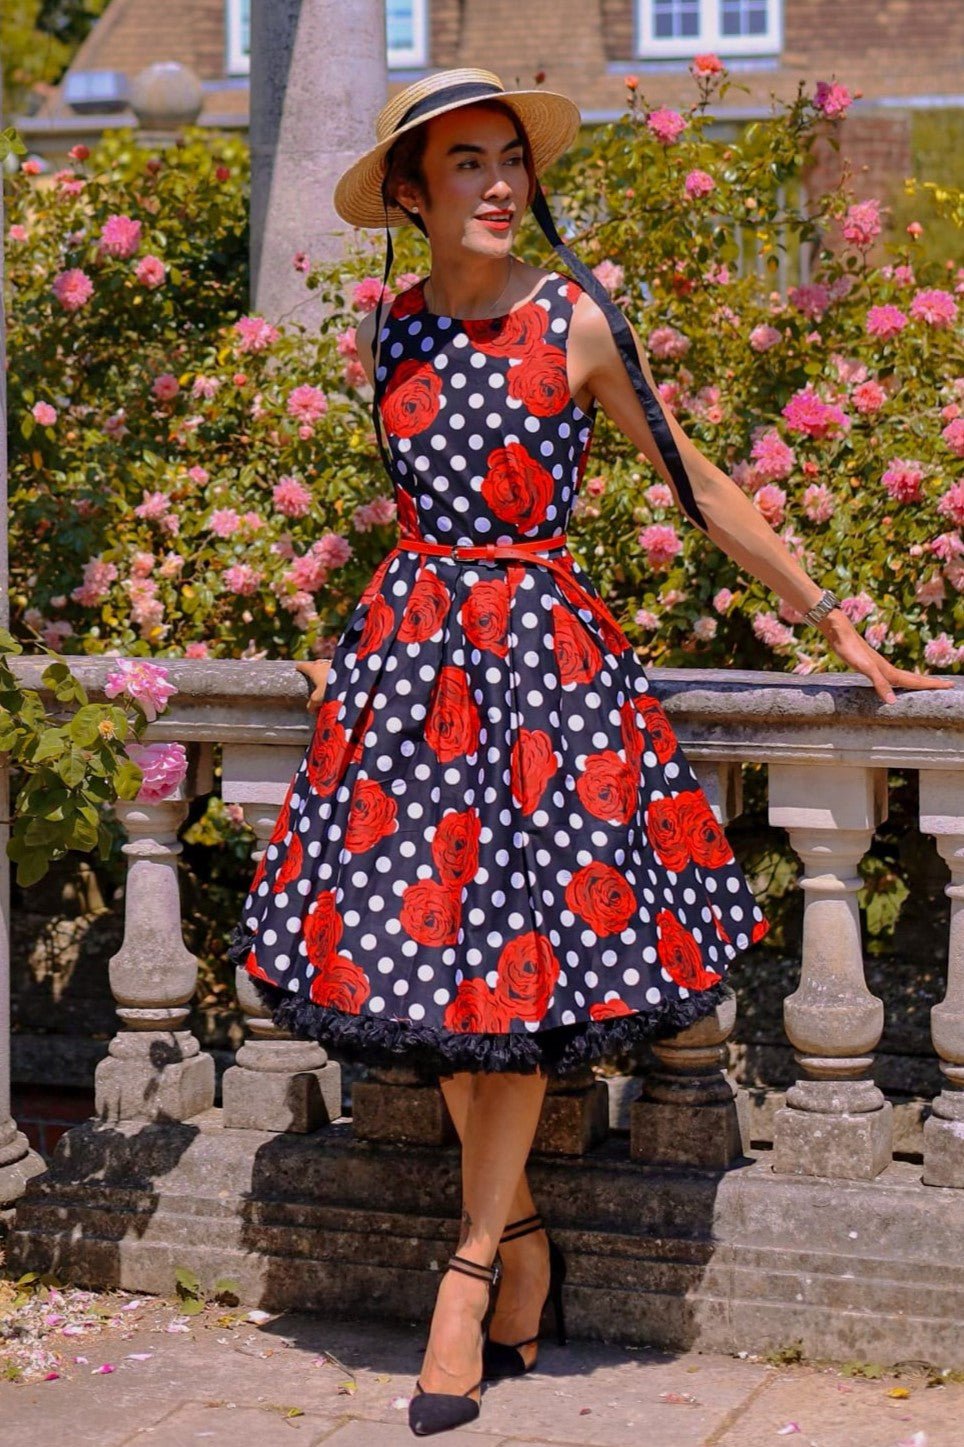 Customer wears our Annie retro dress in black/red roses and white spot print, in a garden